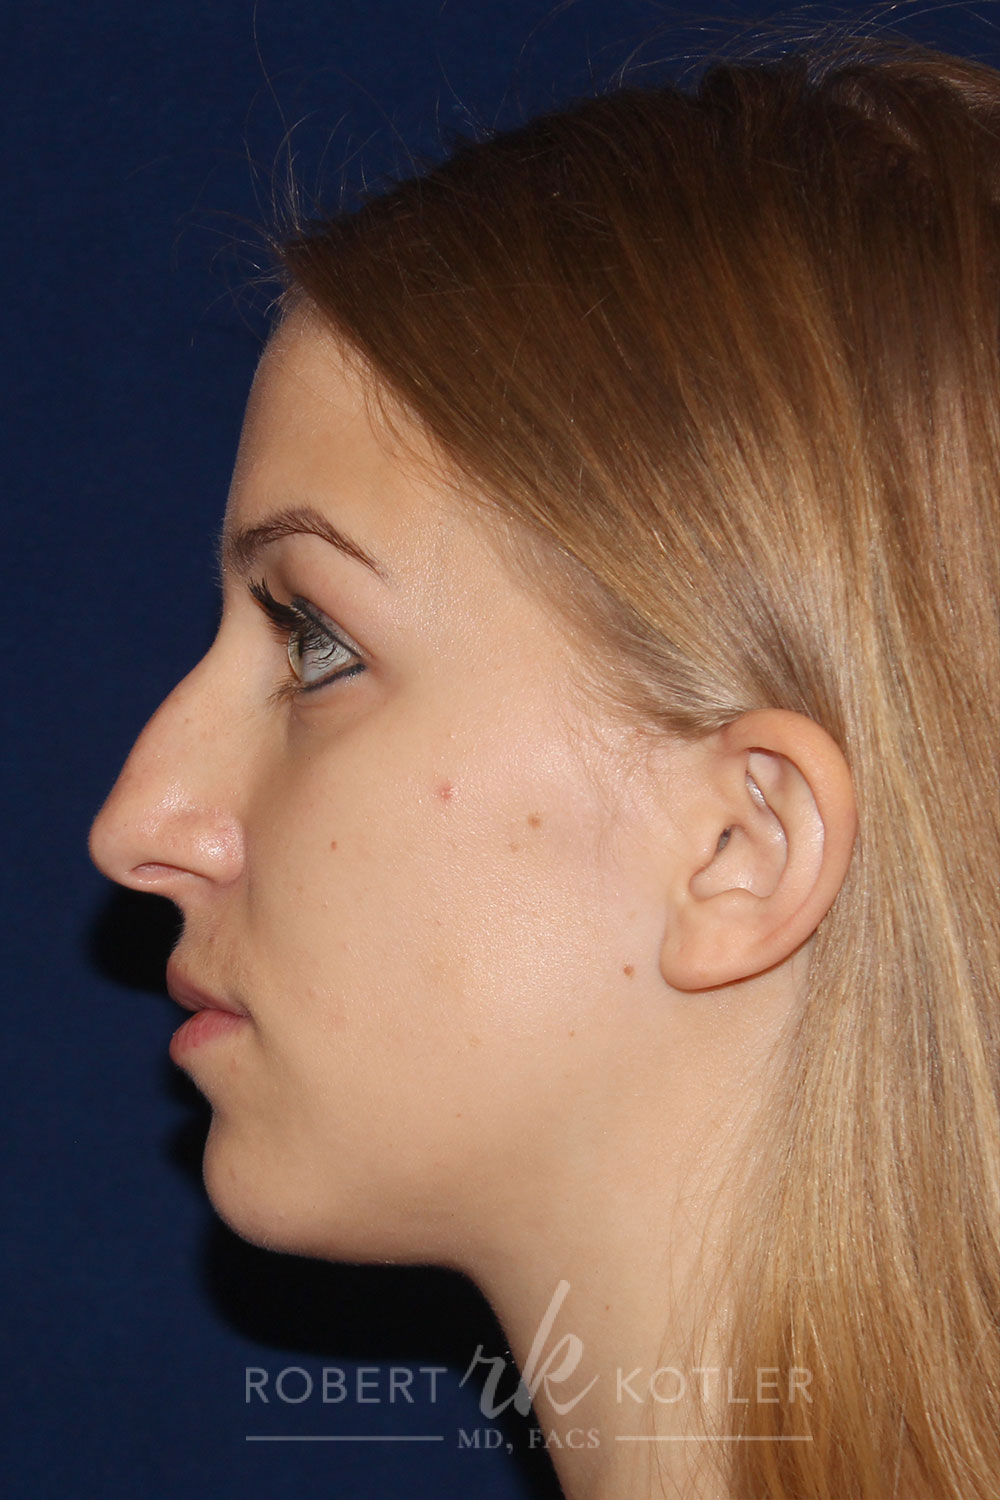 Rhinoplasty - Left Profile - Before Pic - Narrowing of the nose and bridge - Nose tip refinement - Tip elevation - Top Rhinoplasty Surgeon